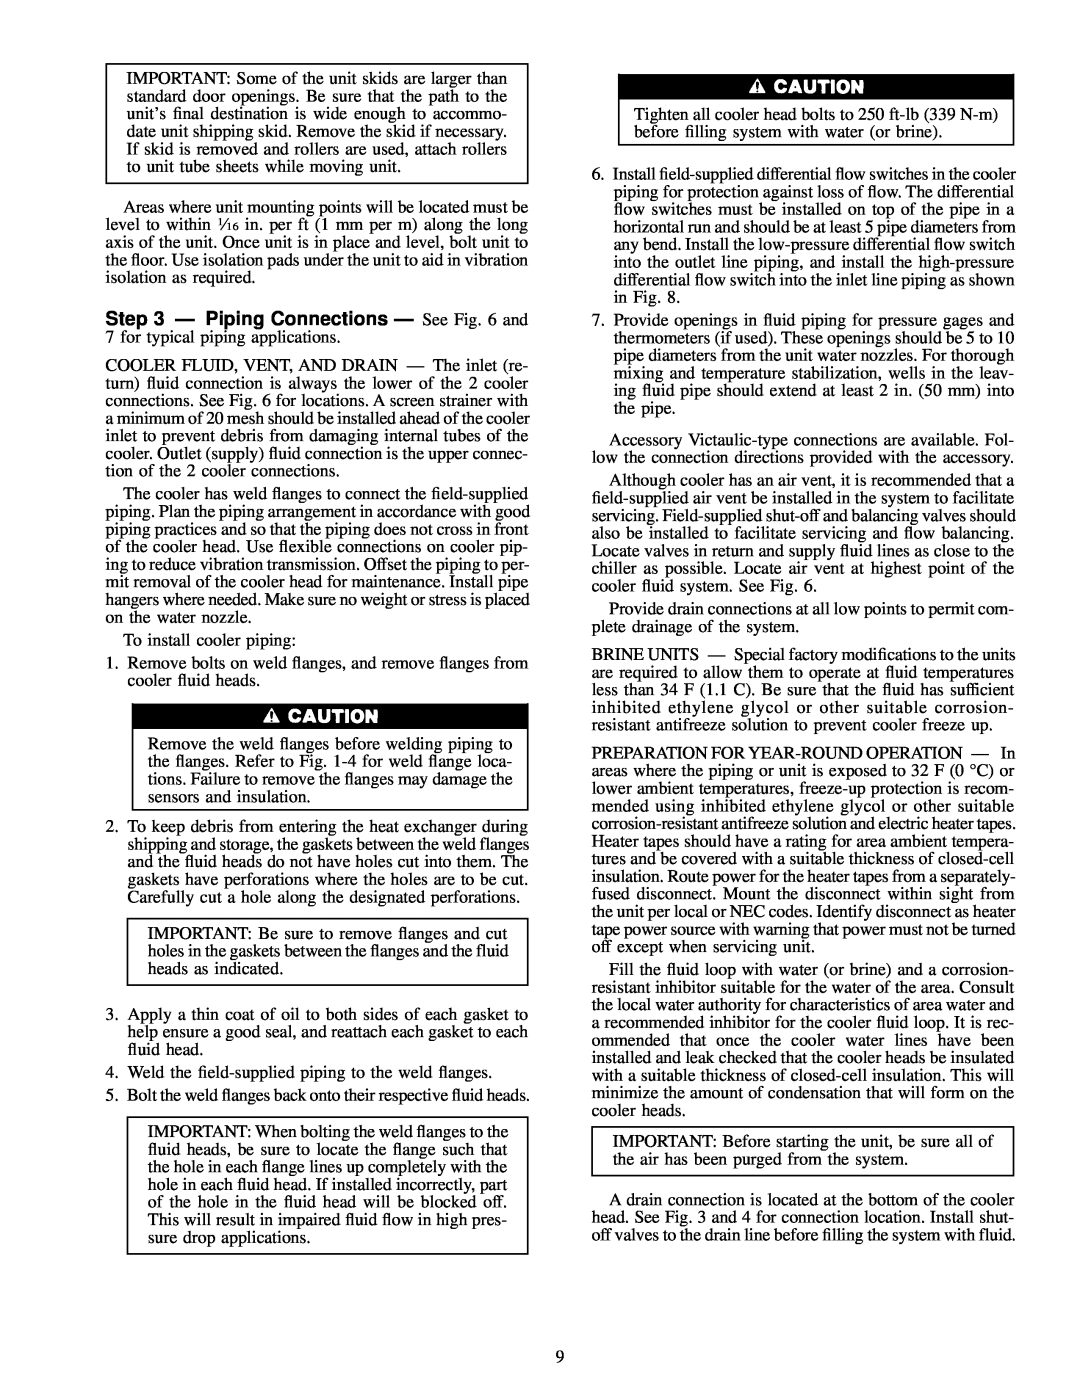 Carrier 30HXA, HXC076-186 installation instructions To install cooler piping 